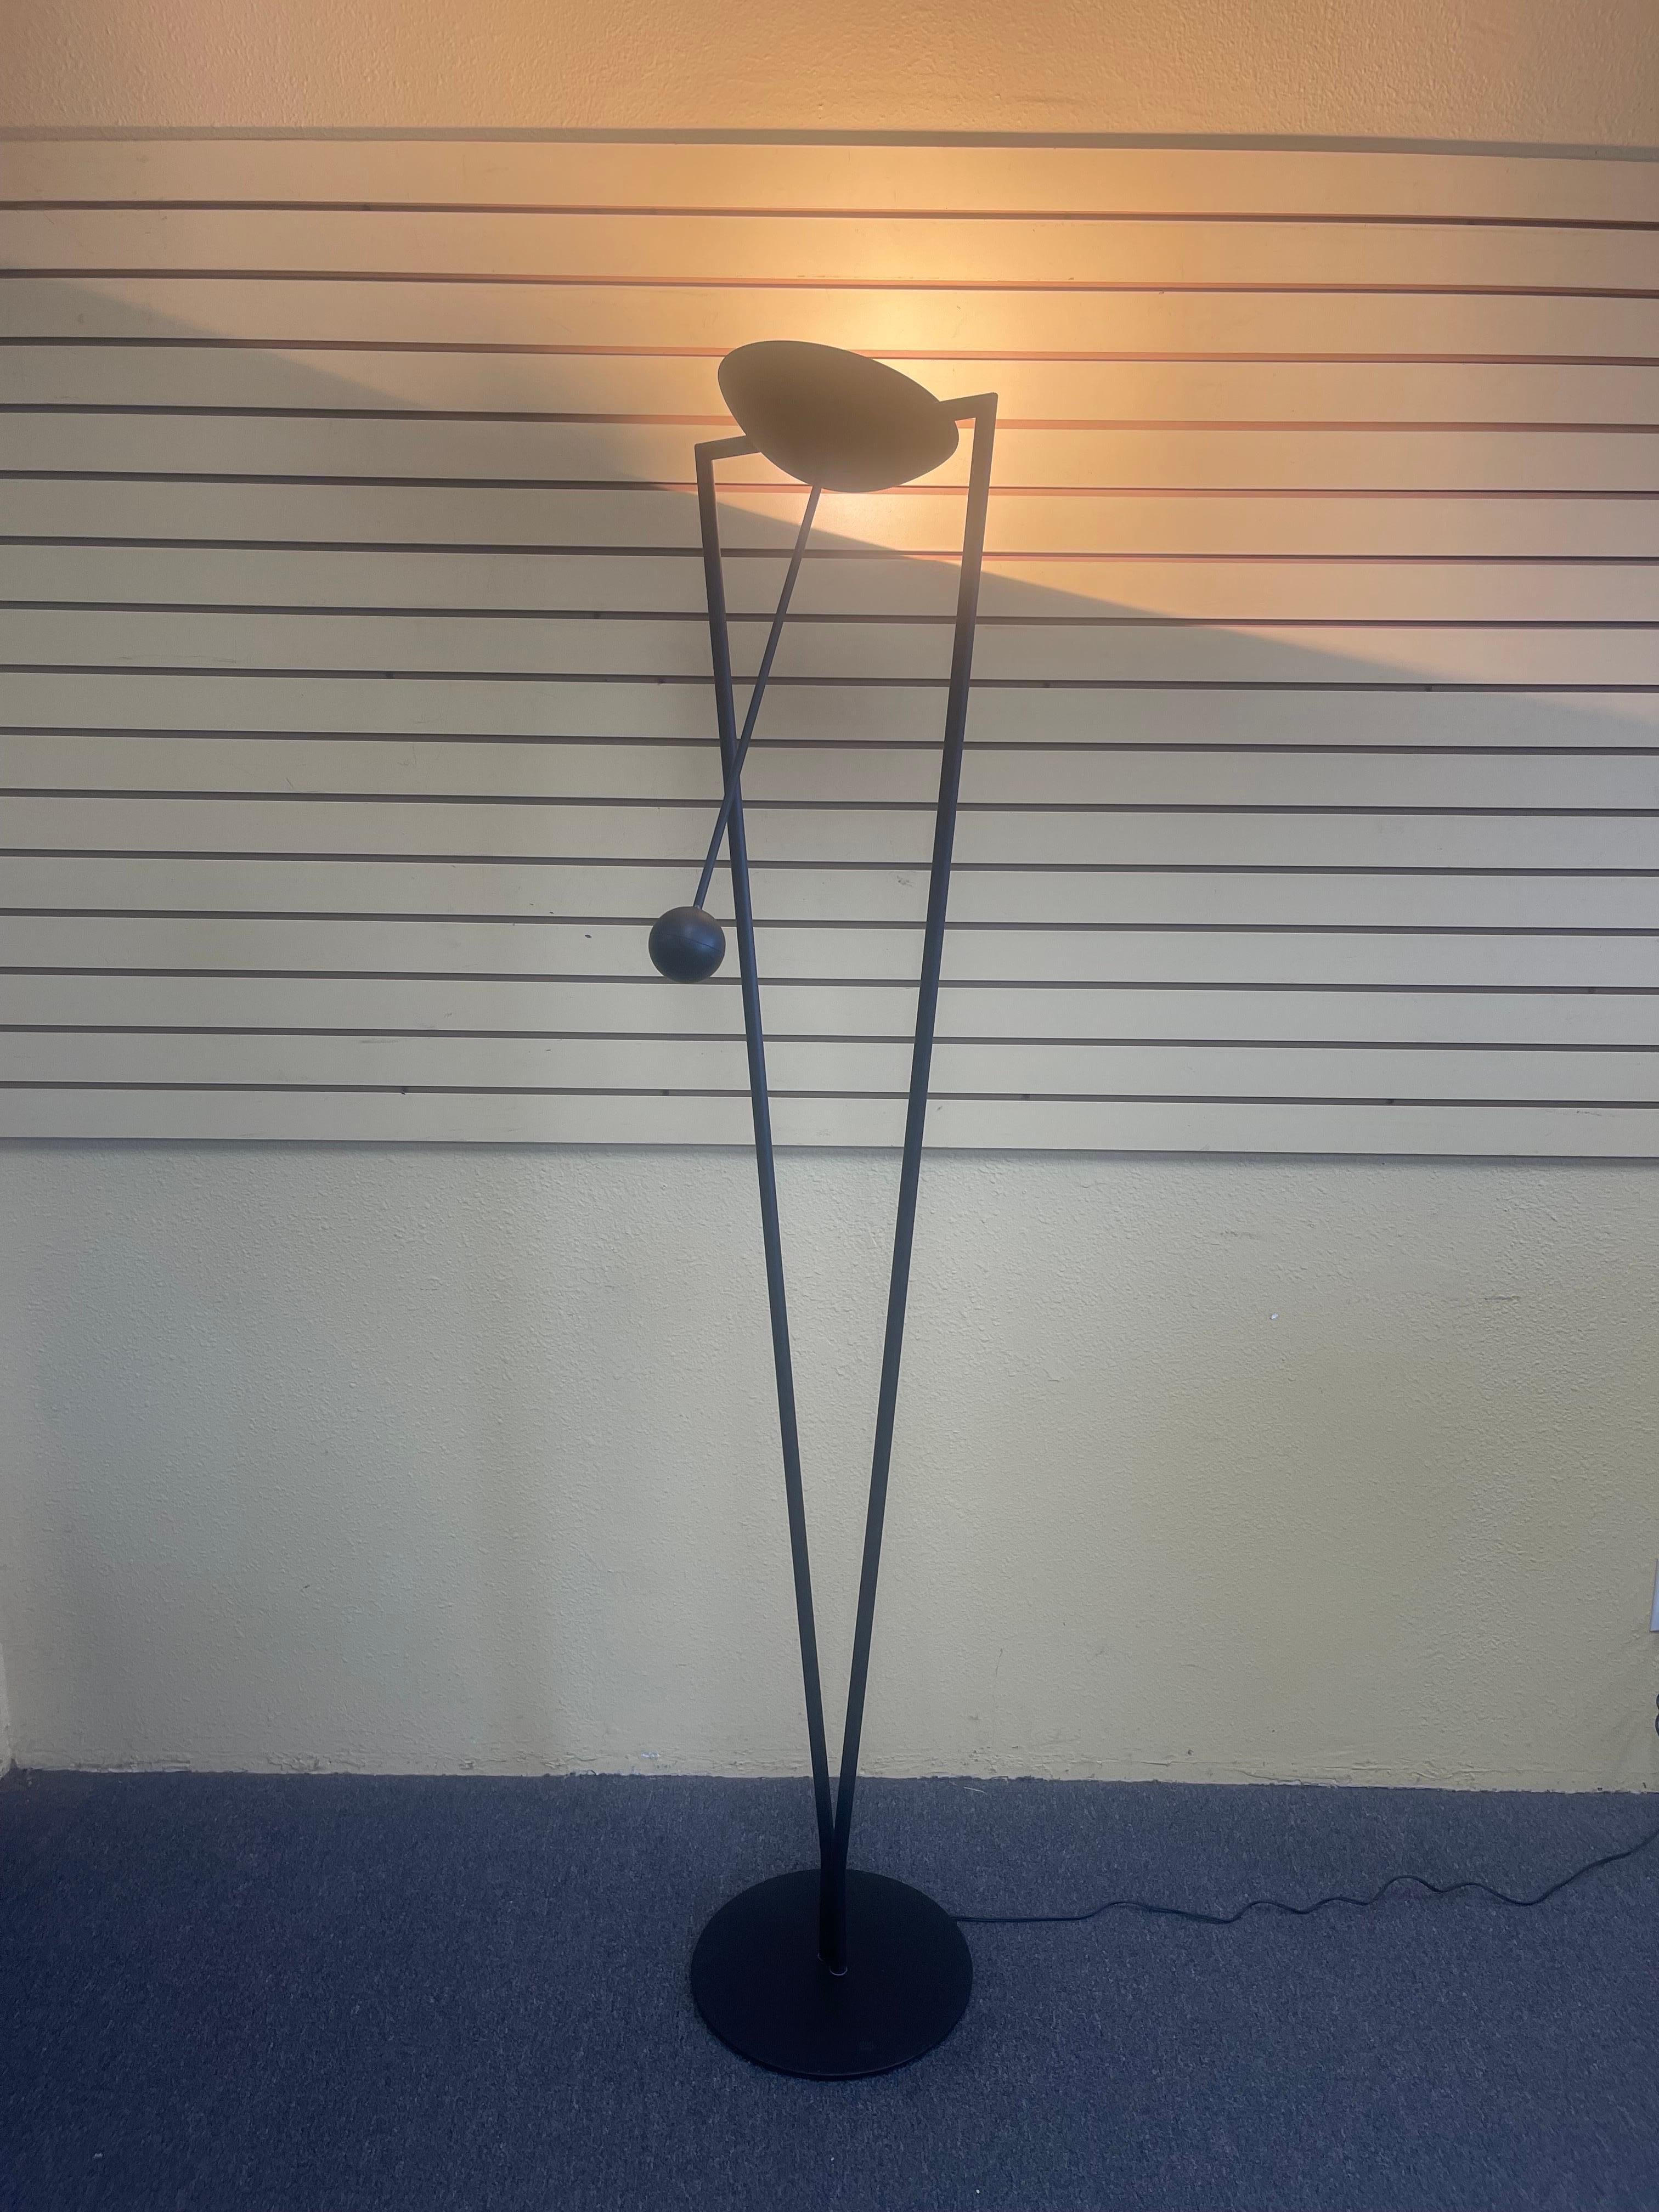 American Post-Modern Sculptural Multi-Directional Floor Lamp / Torchiere by Ron Rezek For Sale